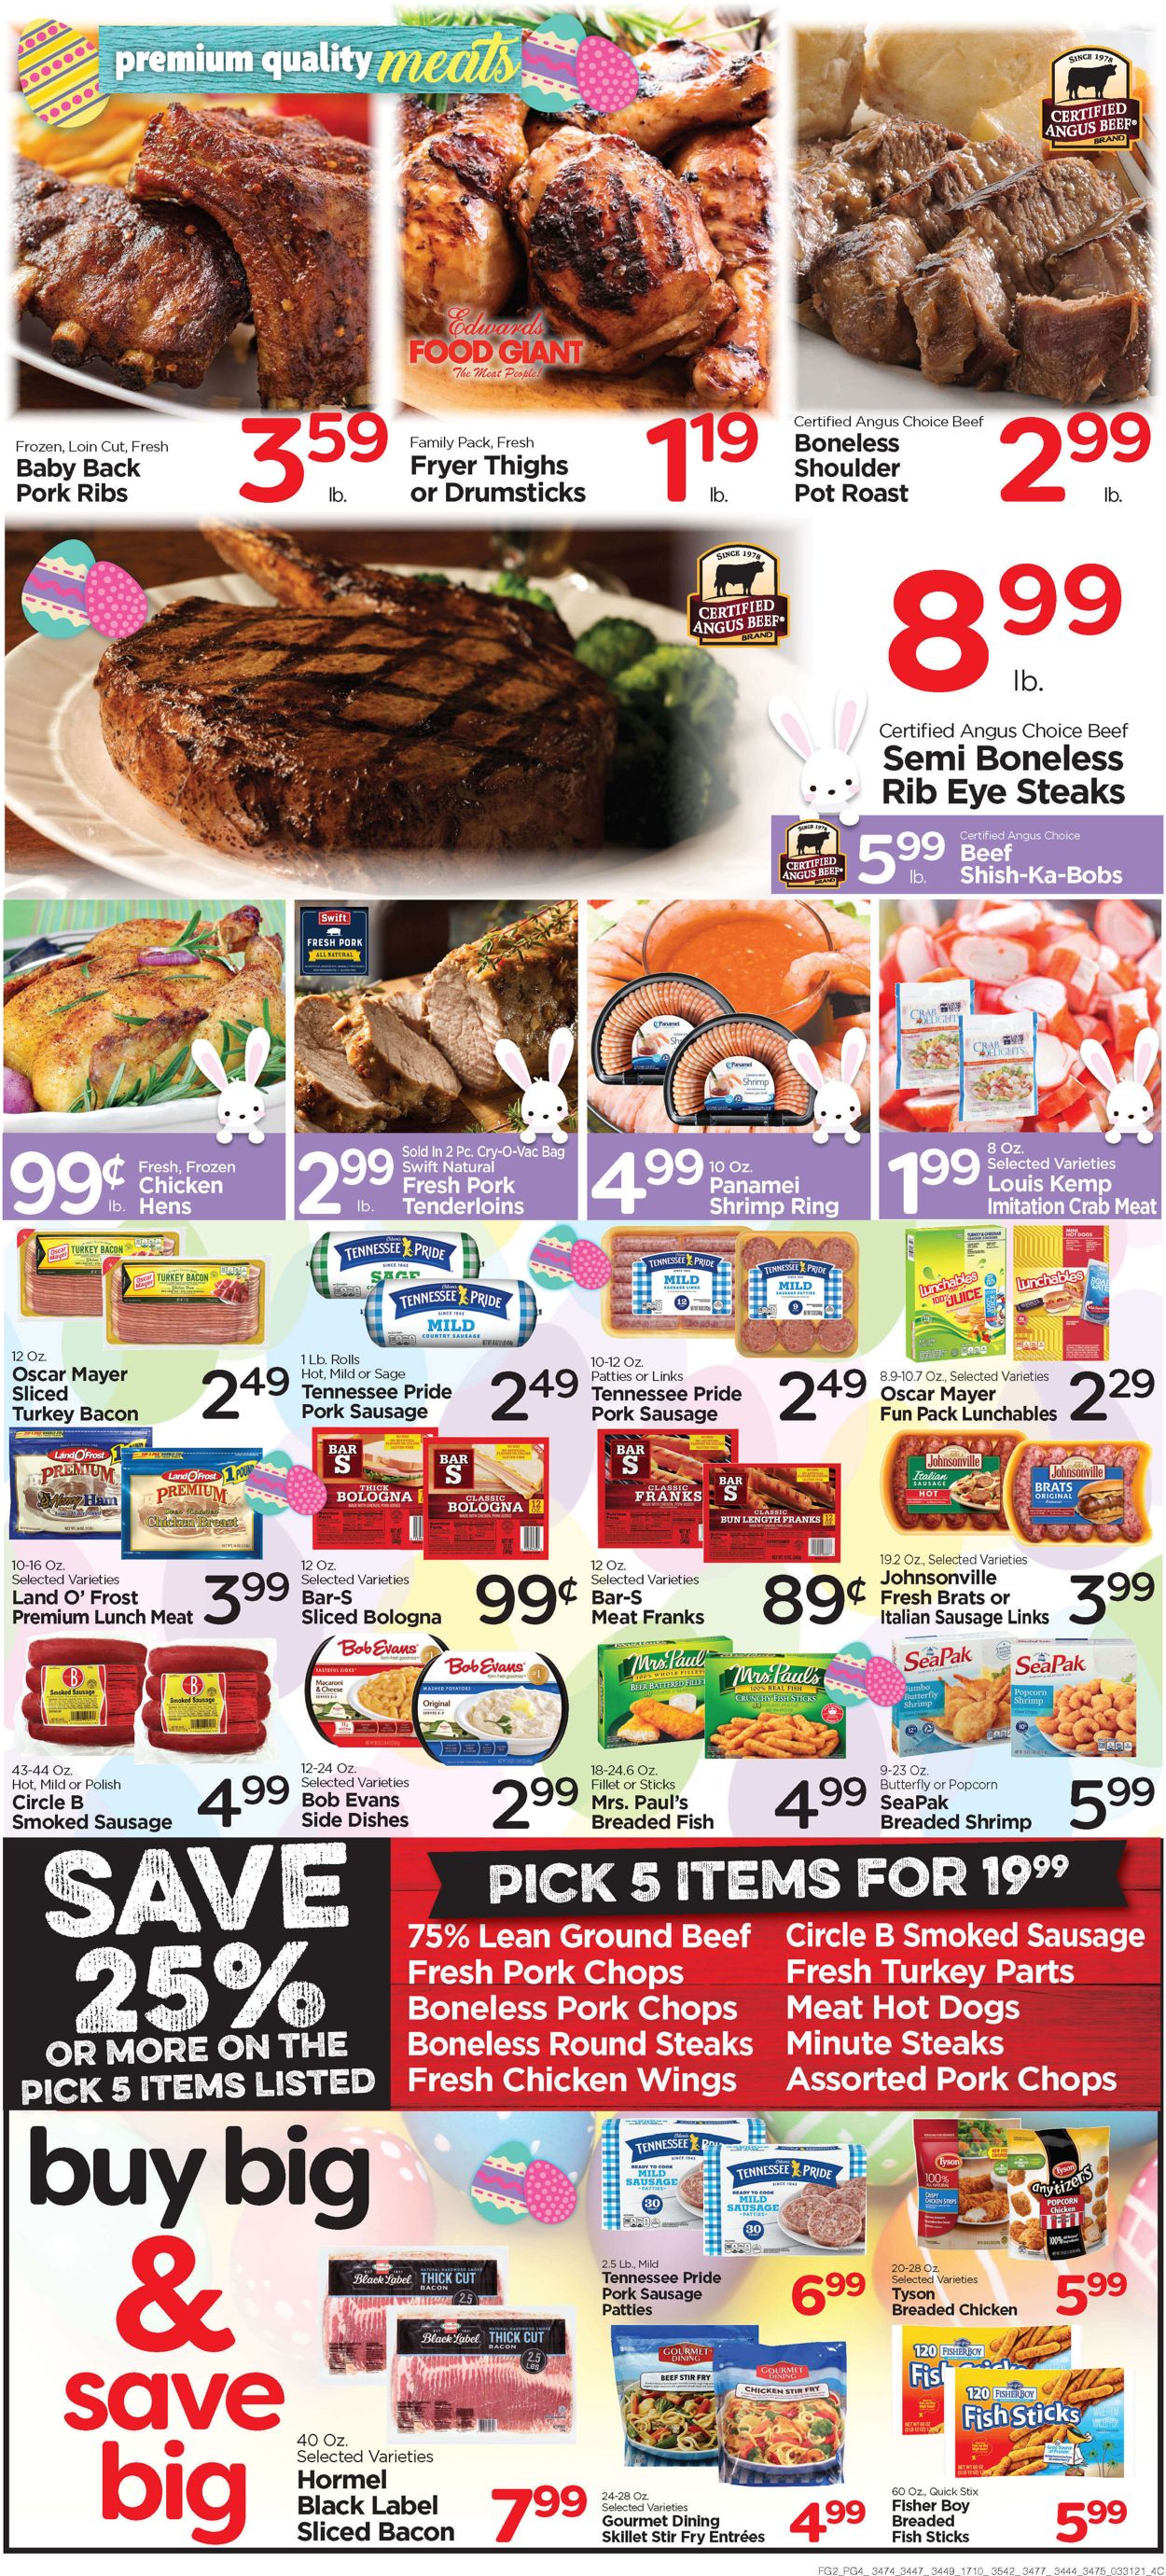 Catalogue Edwards Food Giant Easter 2021 ad from 03/31/2021